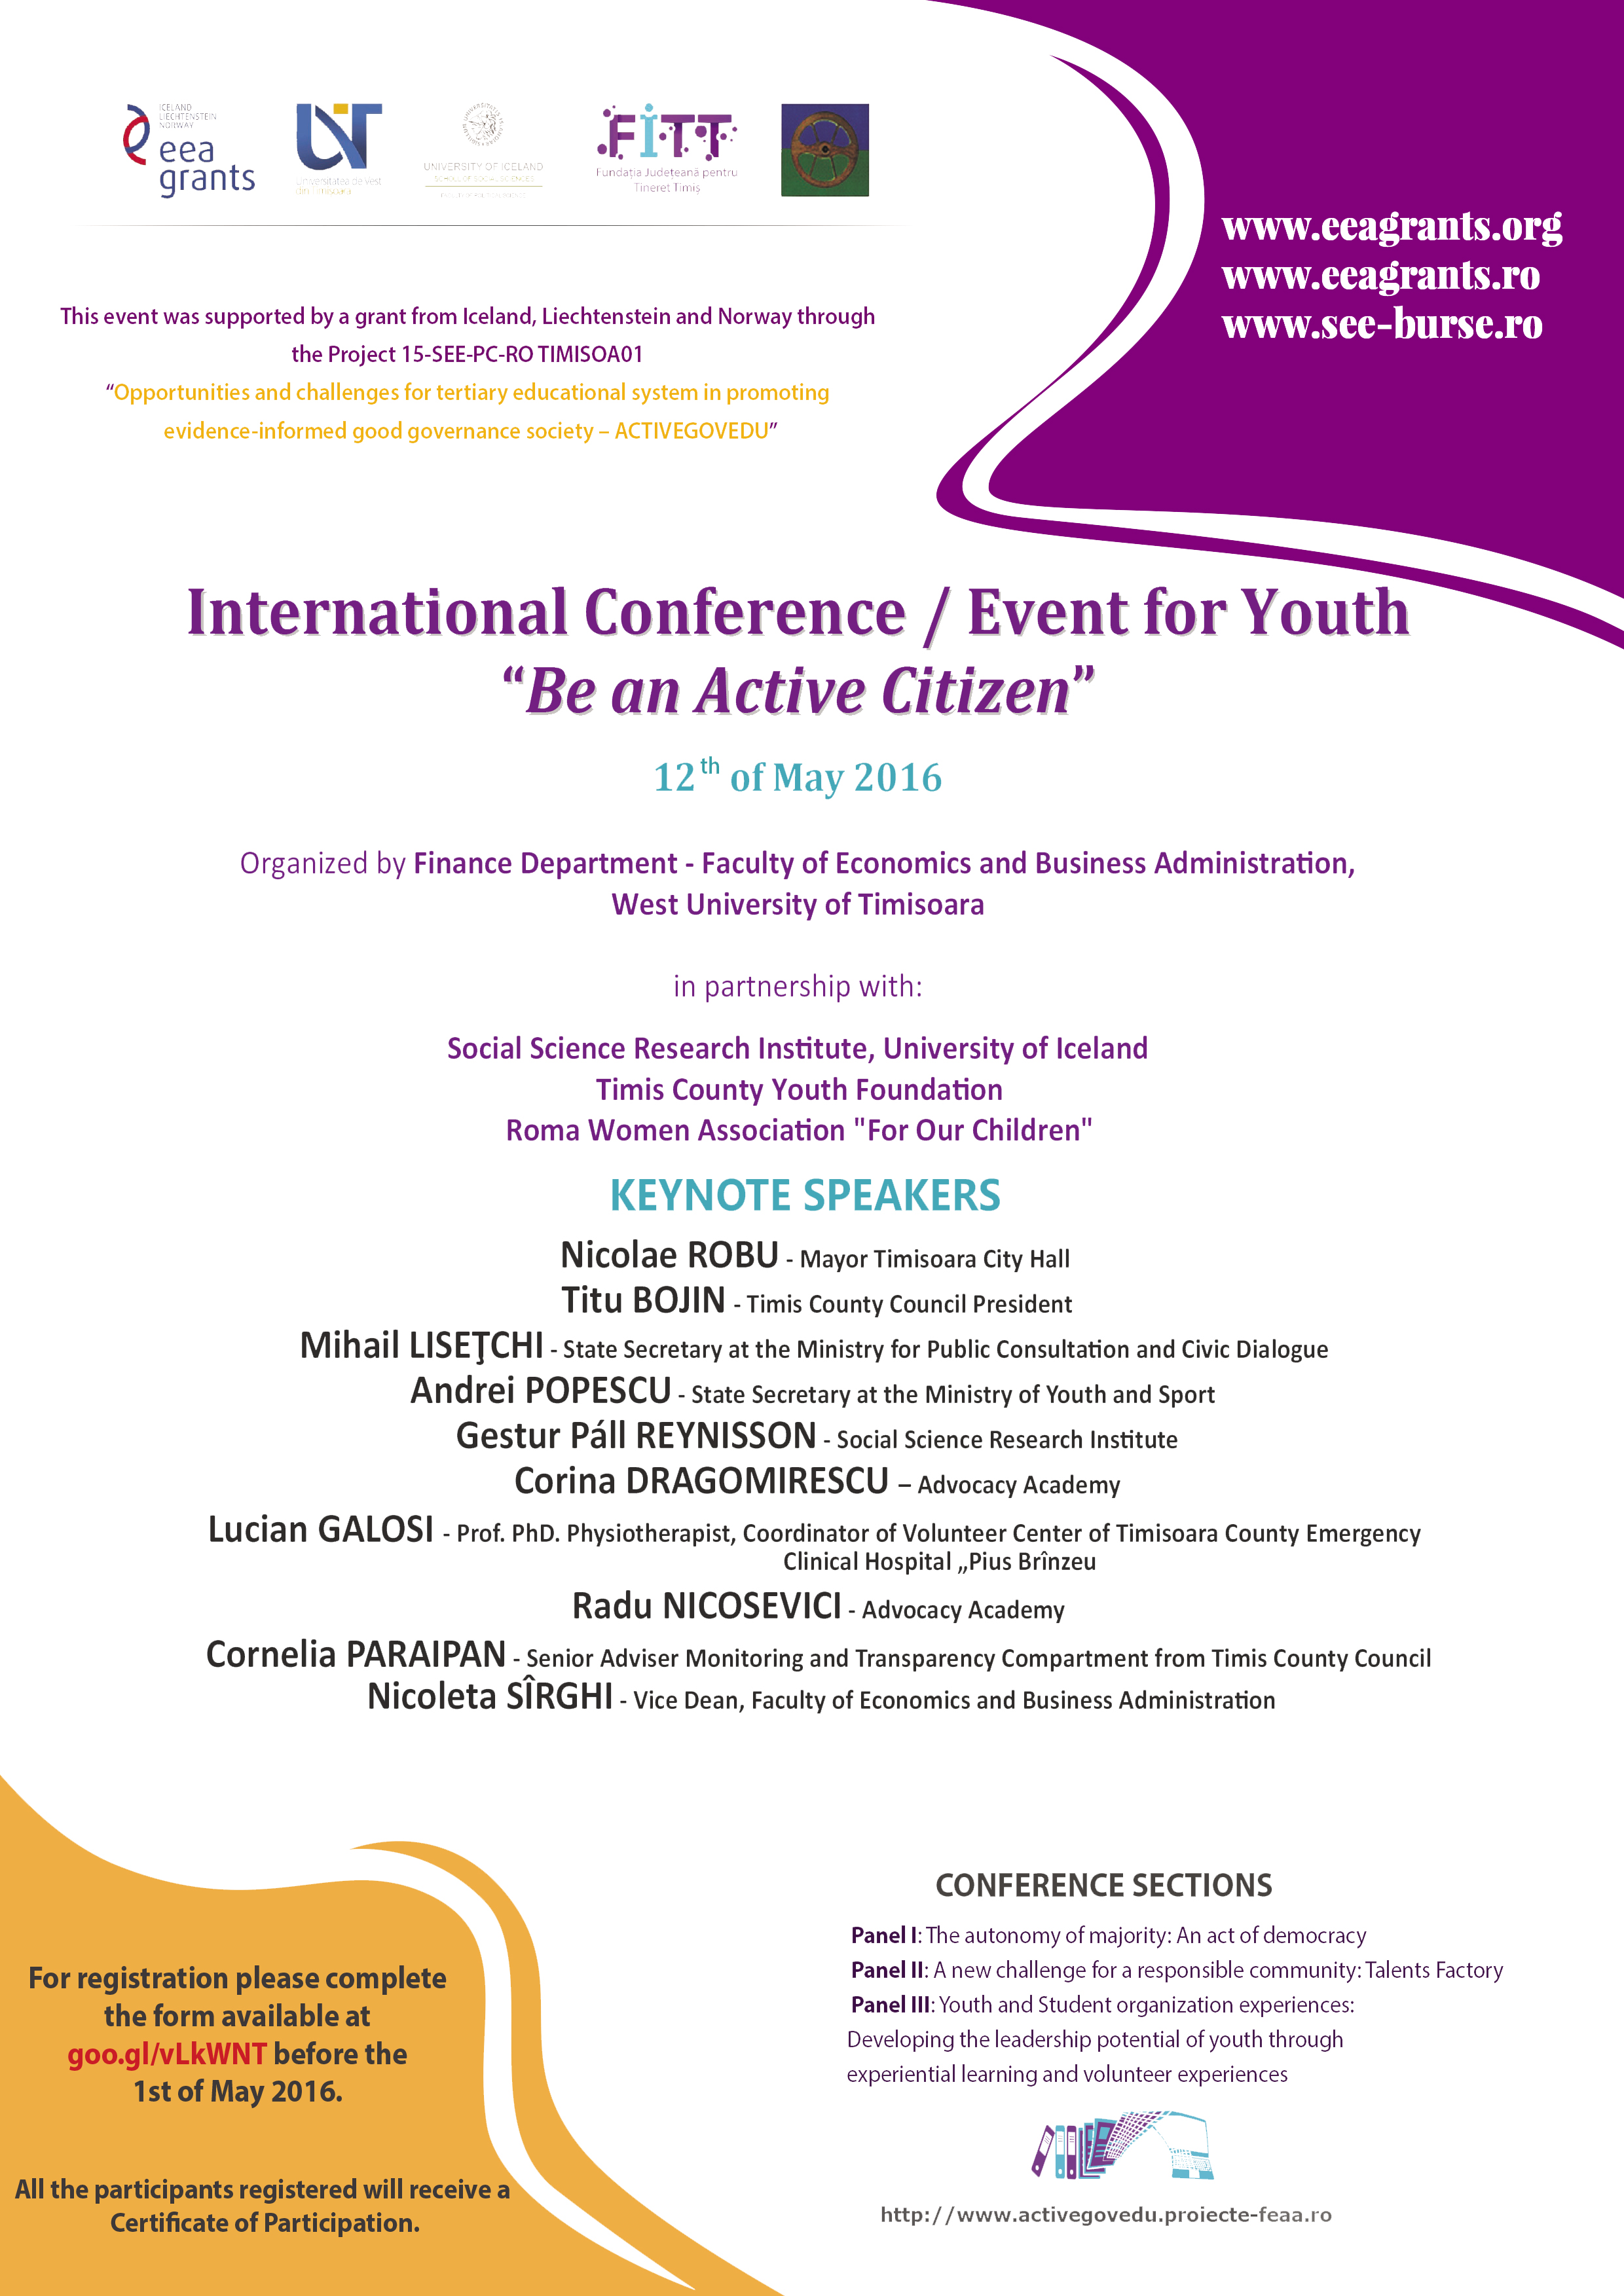 International Conference “Be an Active Citizen” 12 May 2016